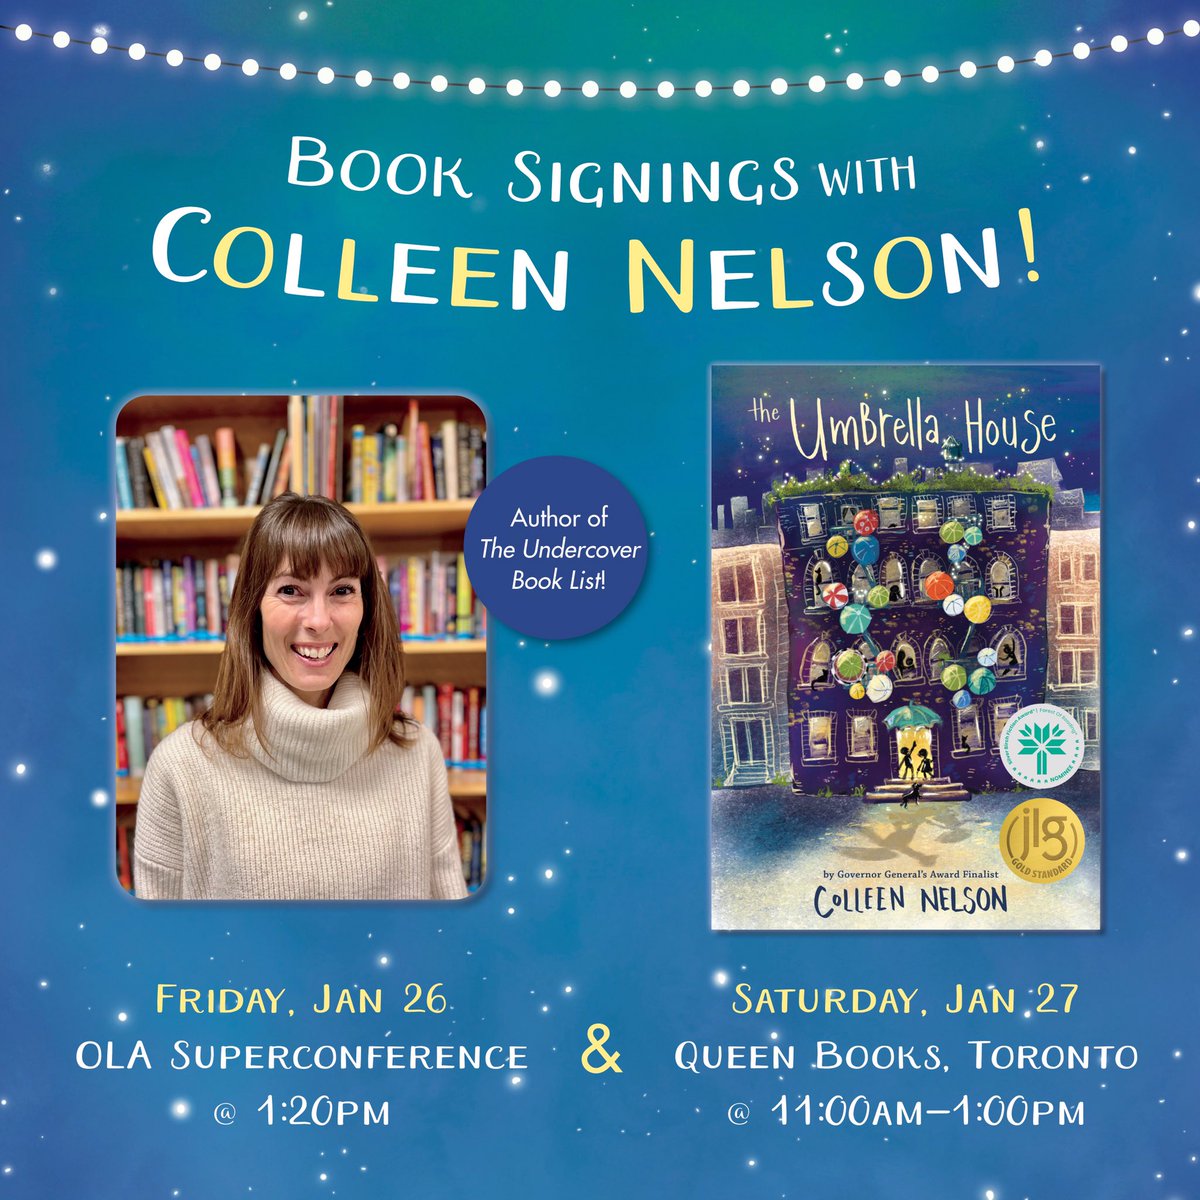 Once a year authors leave their shires for @ONLibraryAssoc Superconference! I will be signing on FRIDAY! And can’t wait to see you! @PajamaPress1 I will also be at @QueenBooksTO on SATURDAY! 11am-1pm!